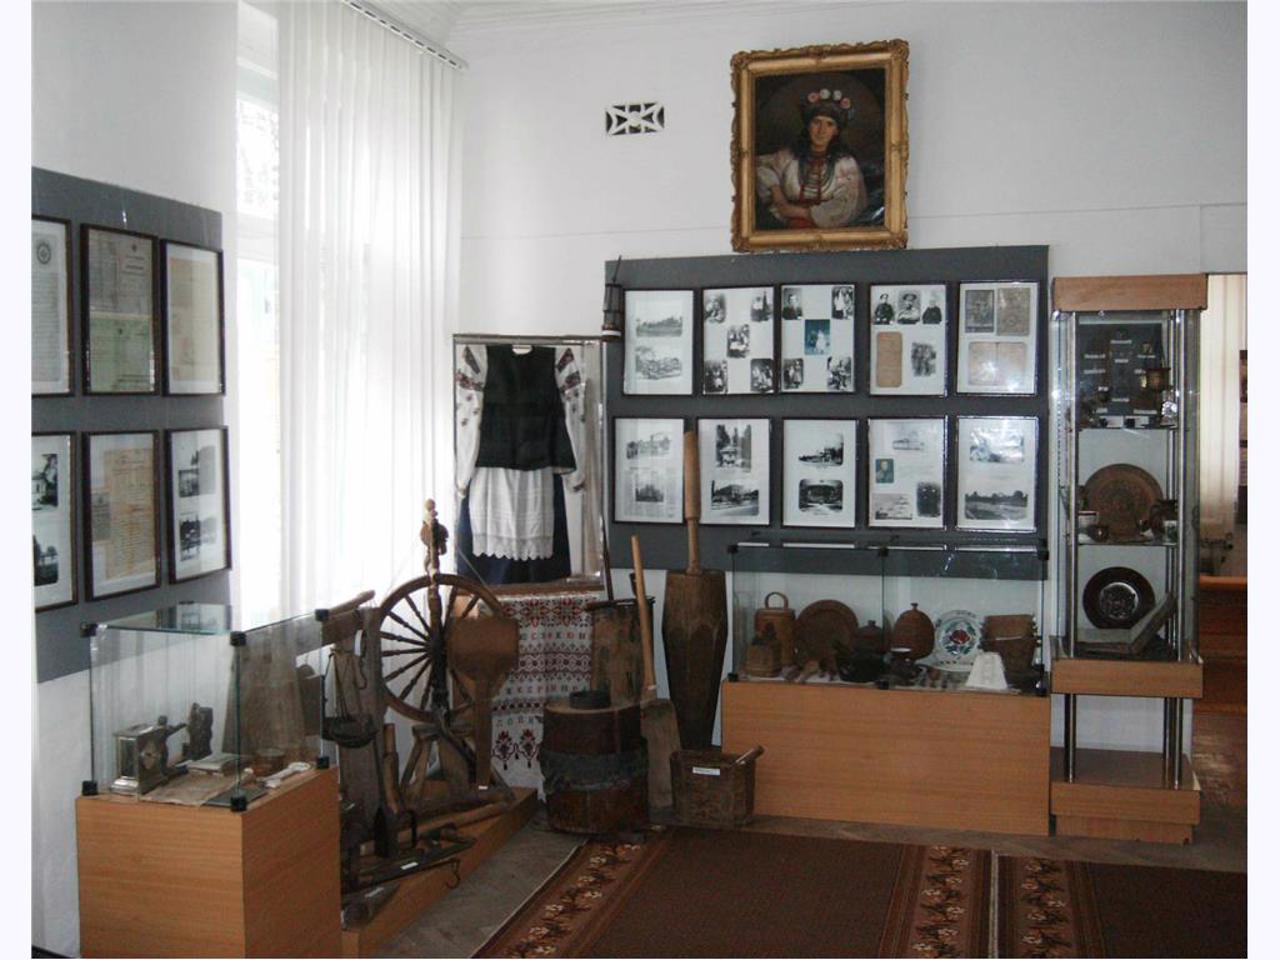 Shostka Museum of Local Lore